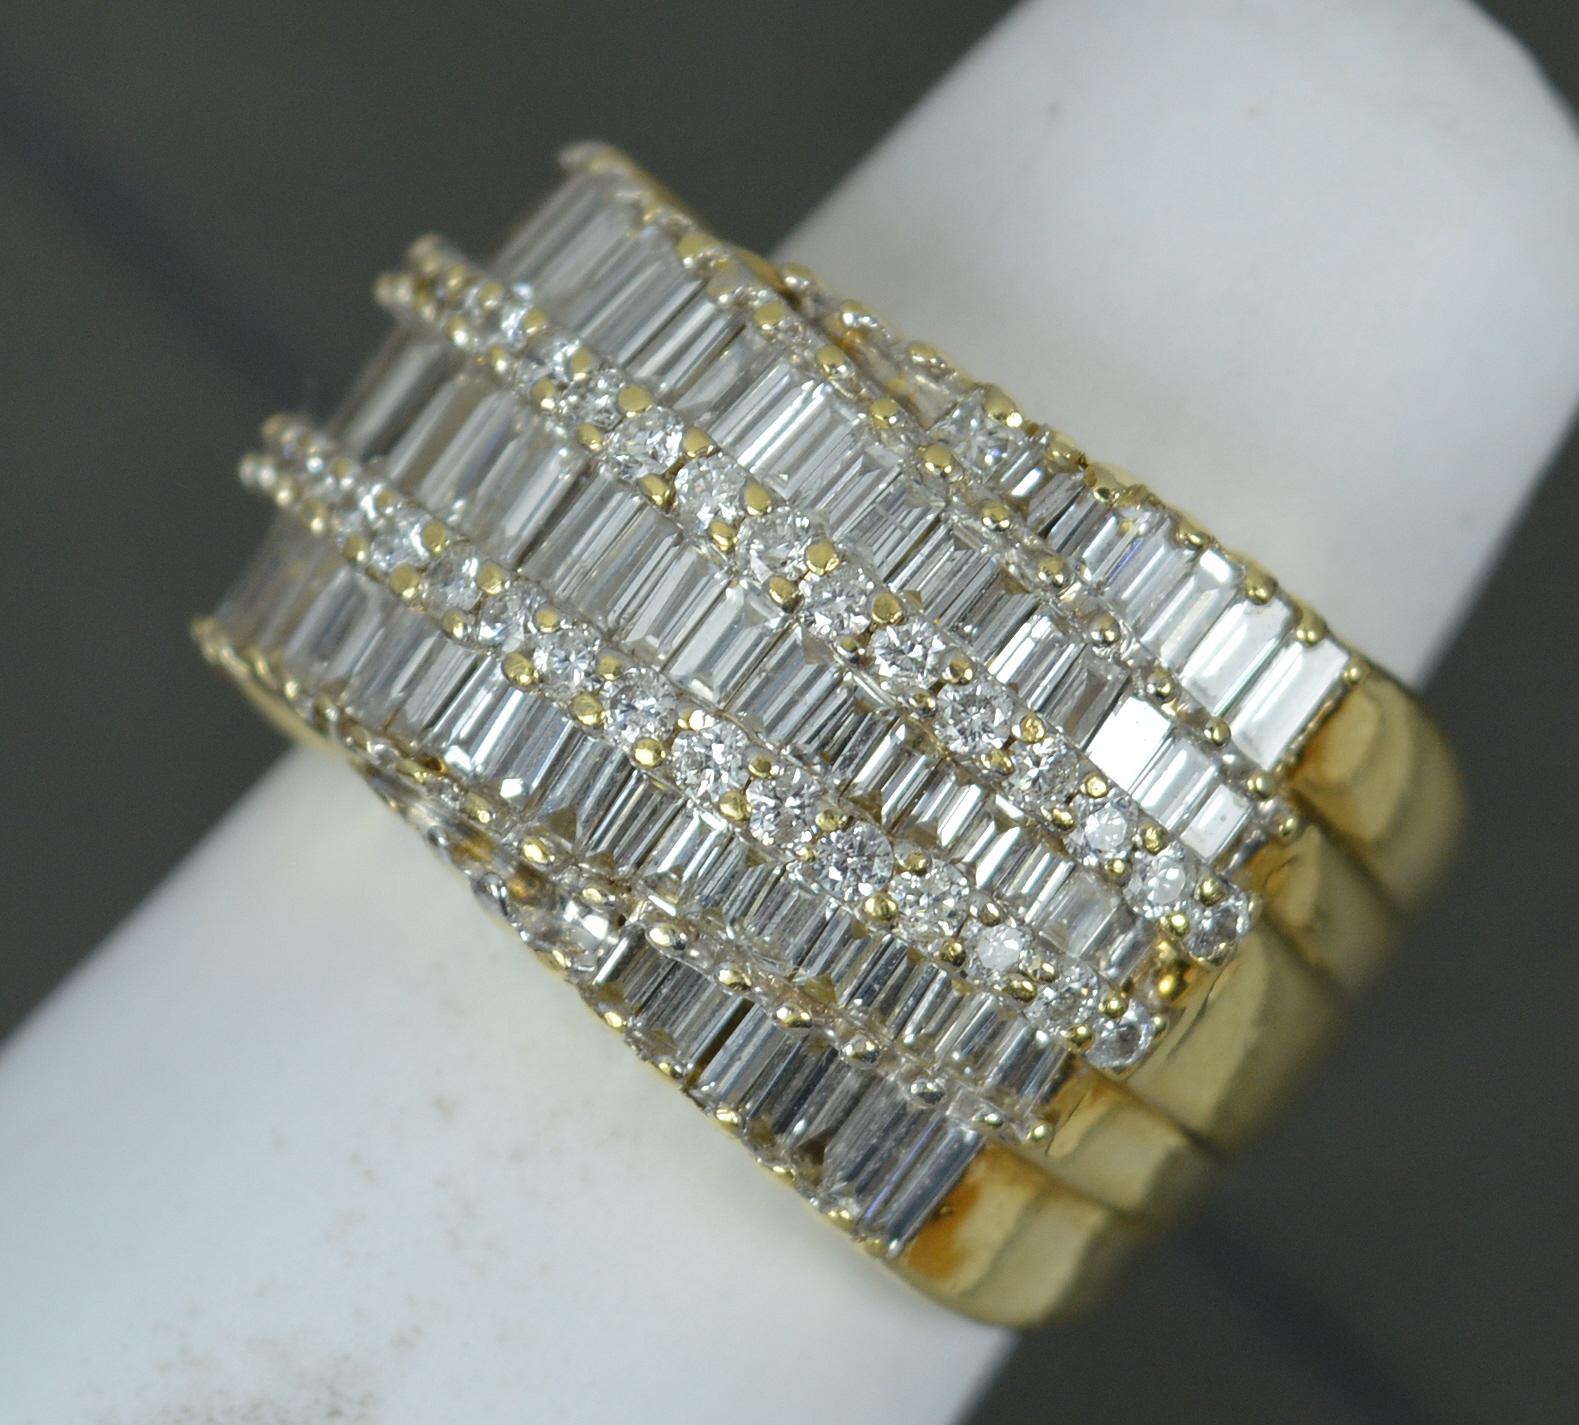 Heavy Bling 3.00 Carat Diamond and 18 Carat Yellow Gold Cluster Ring For Sale 2